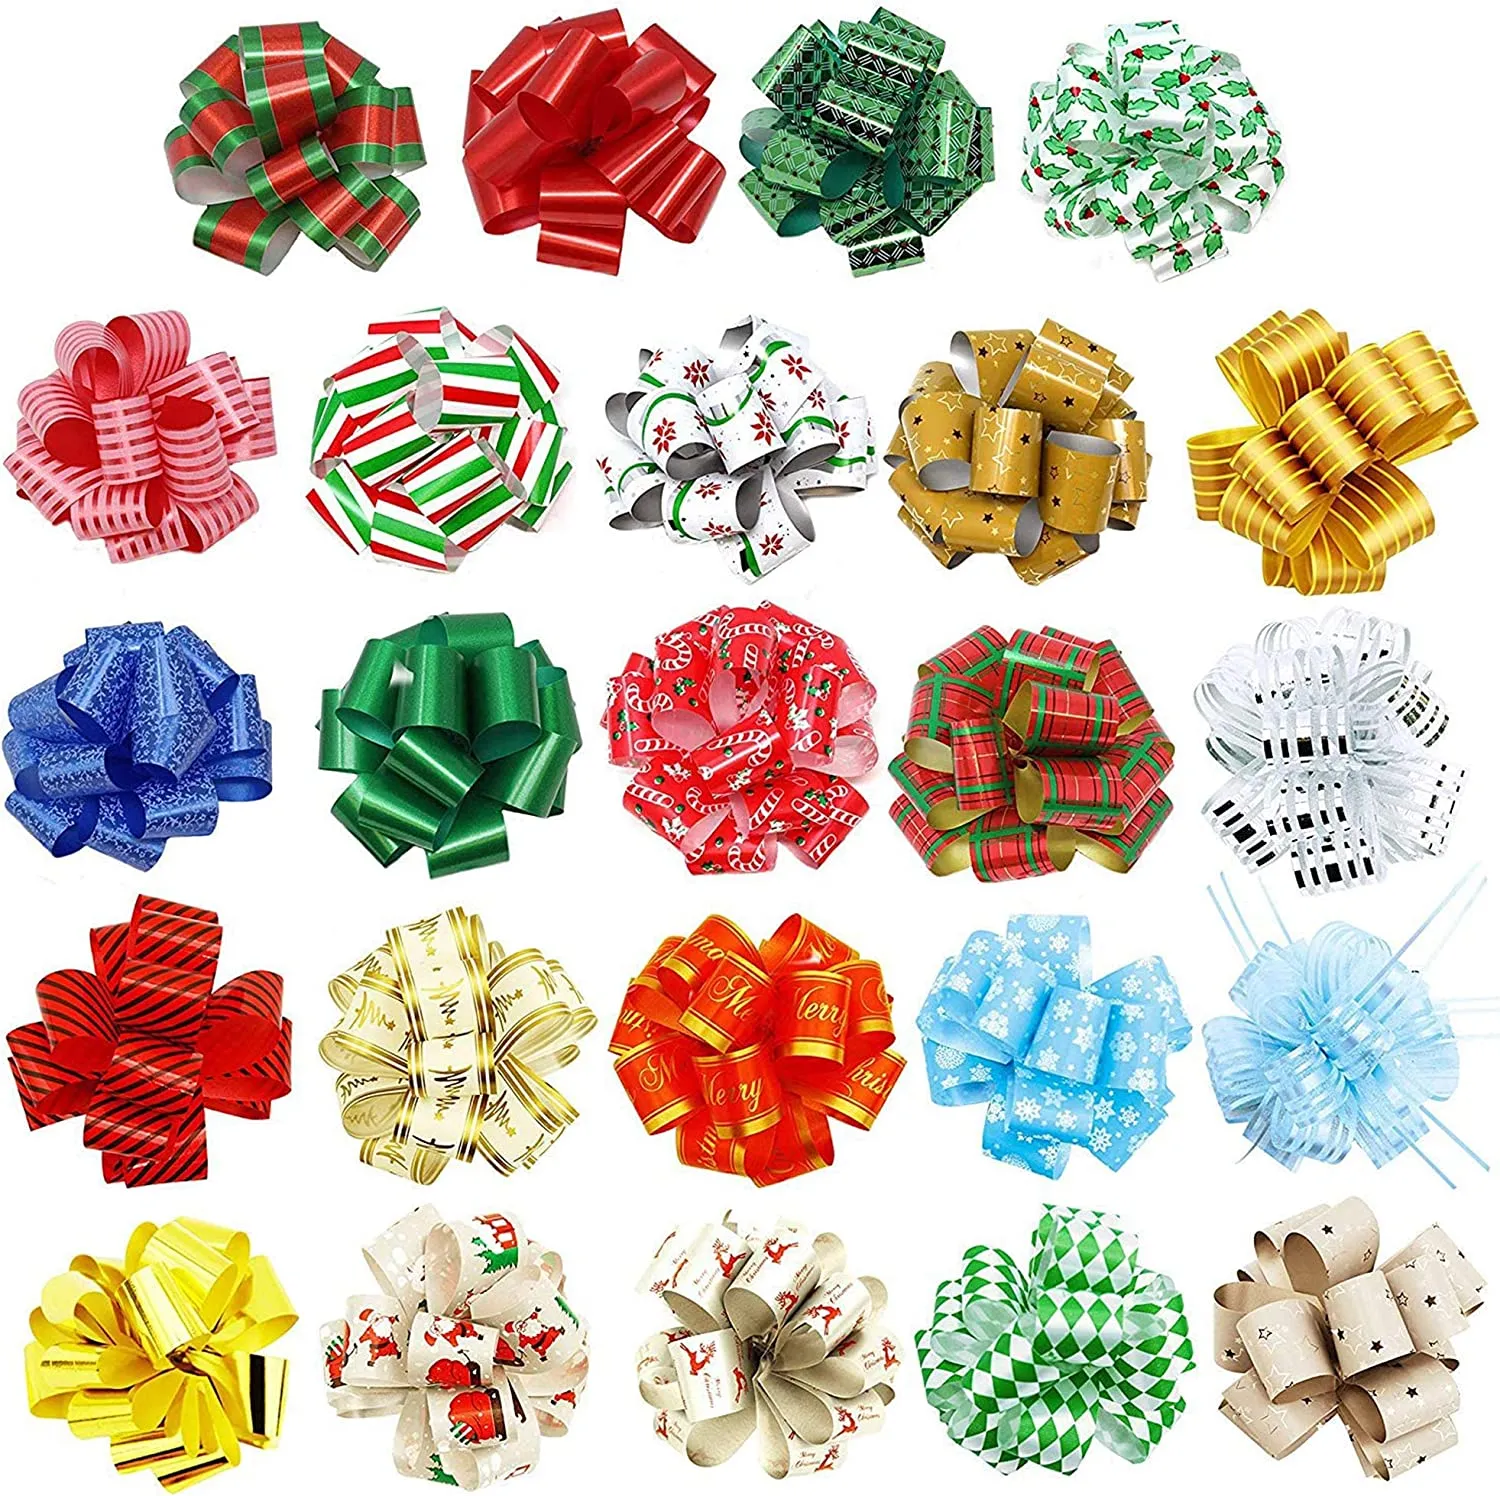 24 Christmas Gift Wrap Ribbon Pull Bows 5 inch ; Easy and Fast Gift Wrapping Accessory for Christmas Bows Baskets Wine Bottles Gifts Decoration, Gift